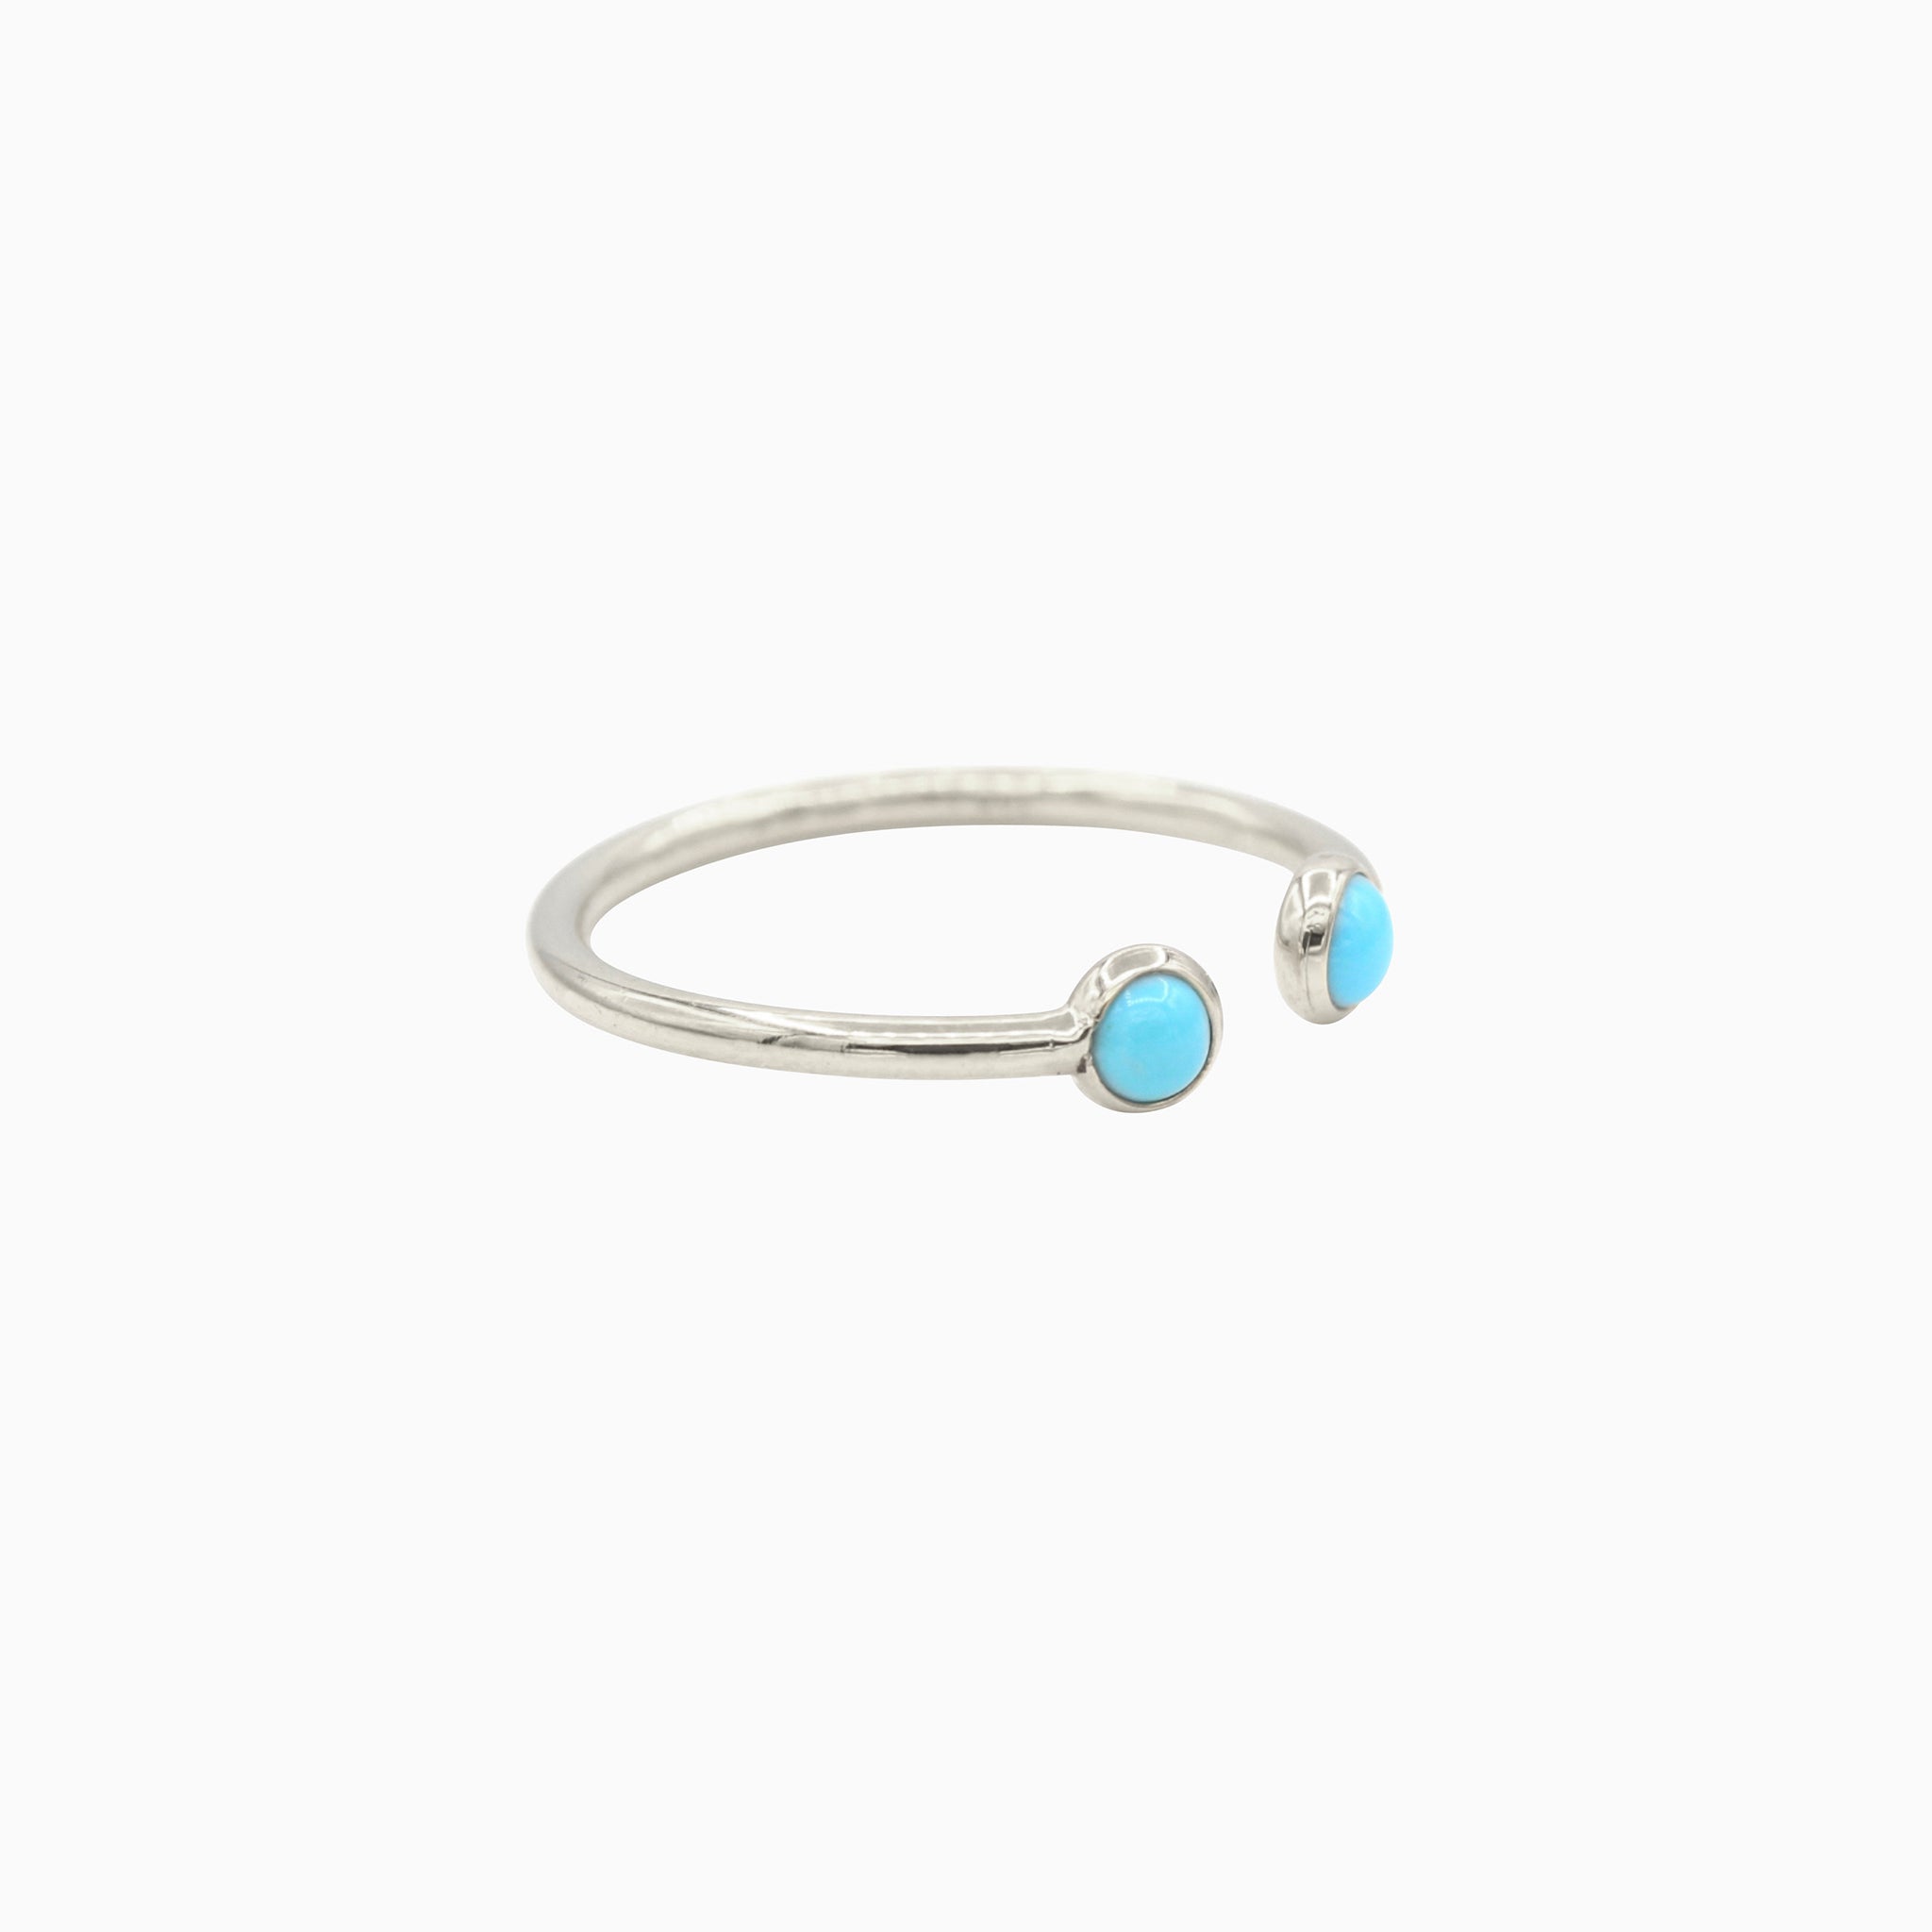 14k White Gold Cabochon Turquoise Open Ring, side view from left